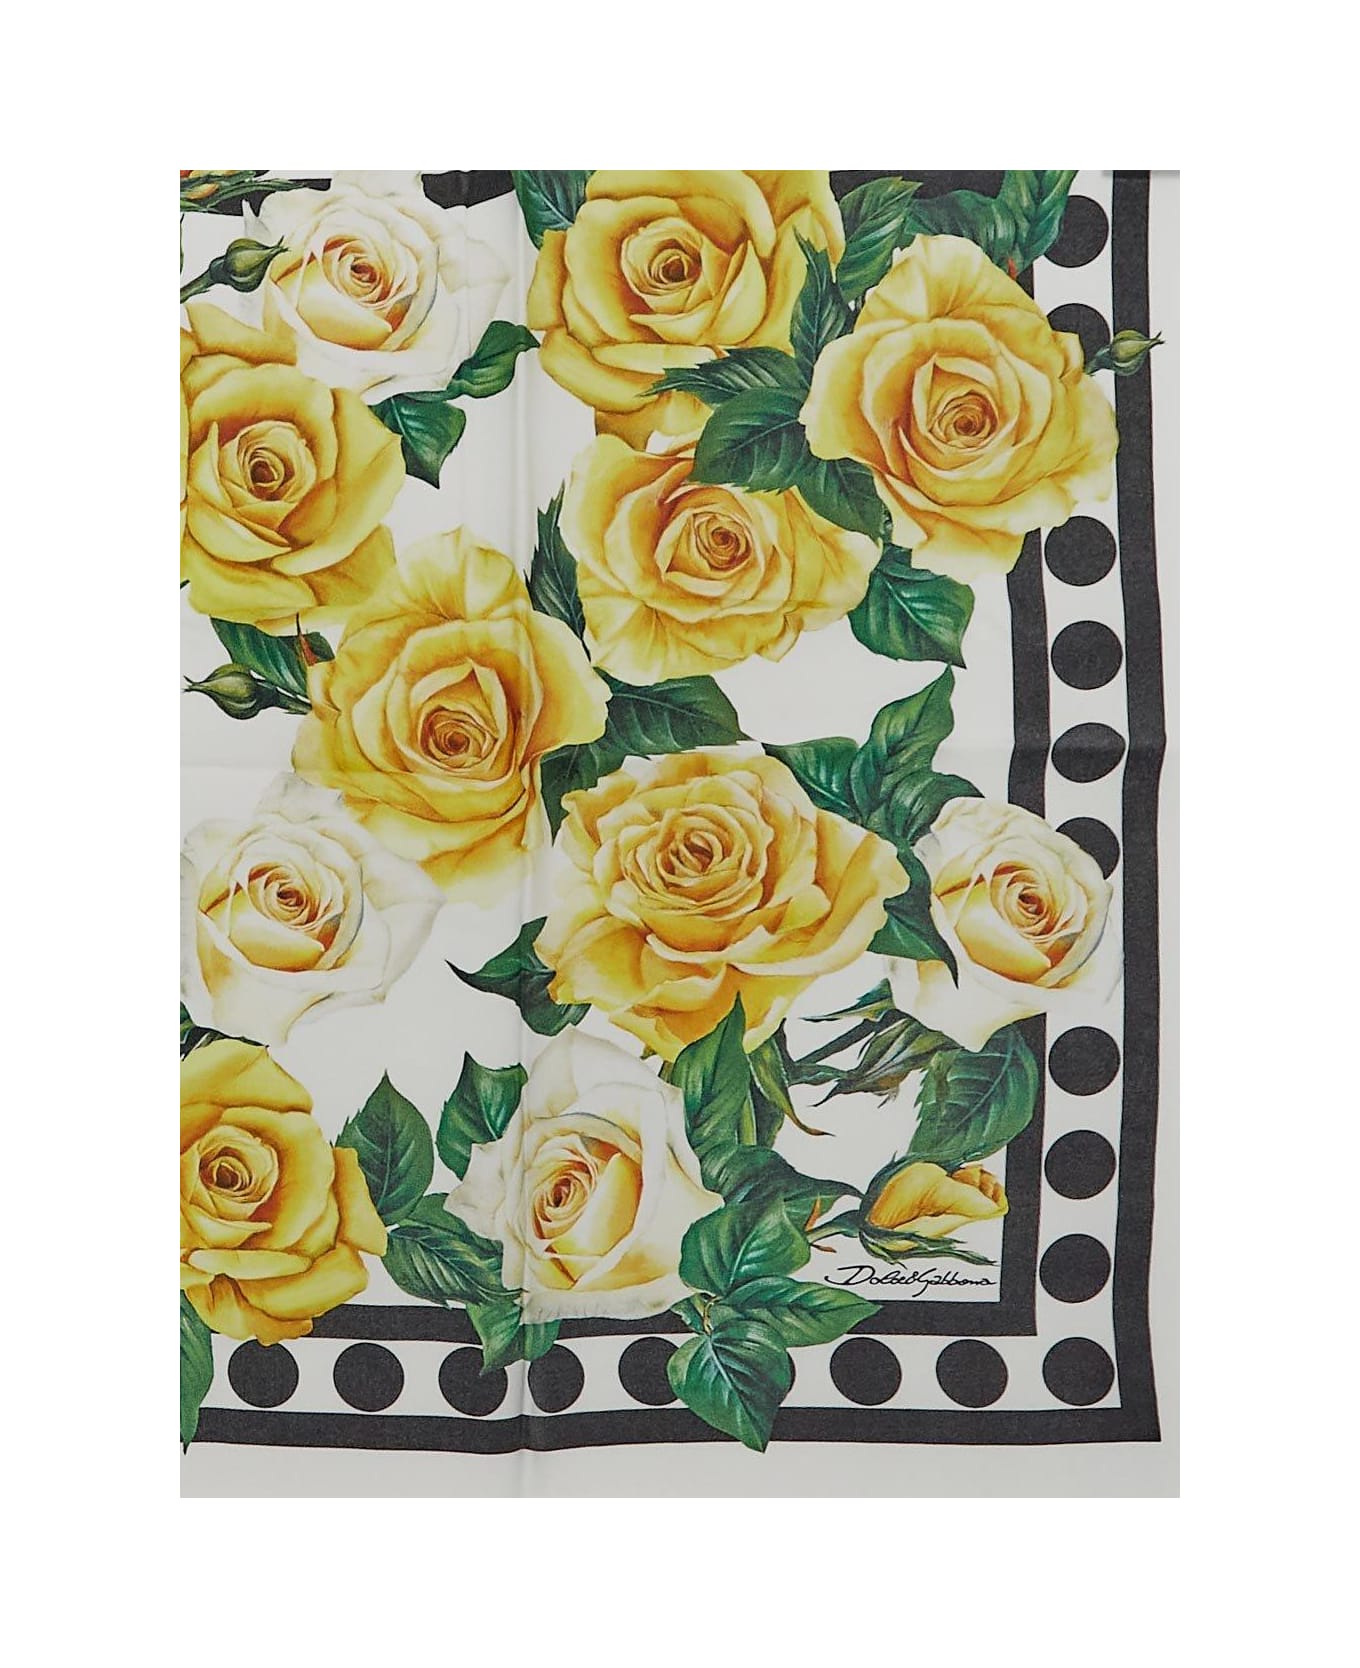 Dolce & Gabbana Floral Printed Square Scarf - Rose gialle fdo bco